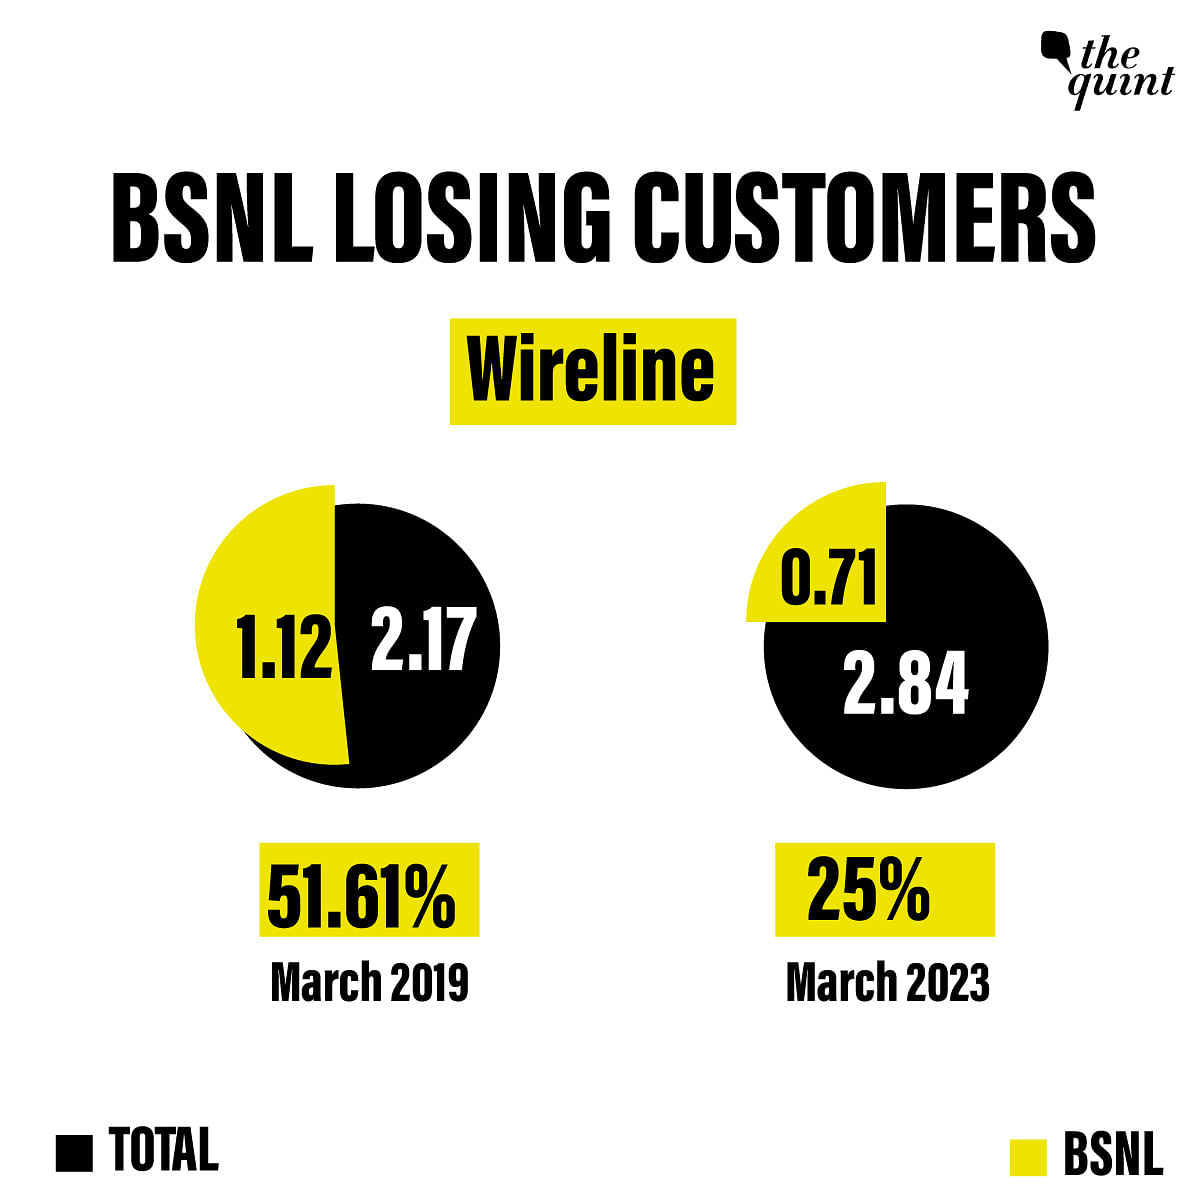 BSNL is now a zombie public enterprise, a perfect example of why the government should not be in business.